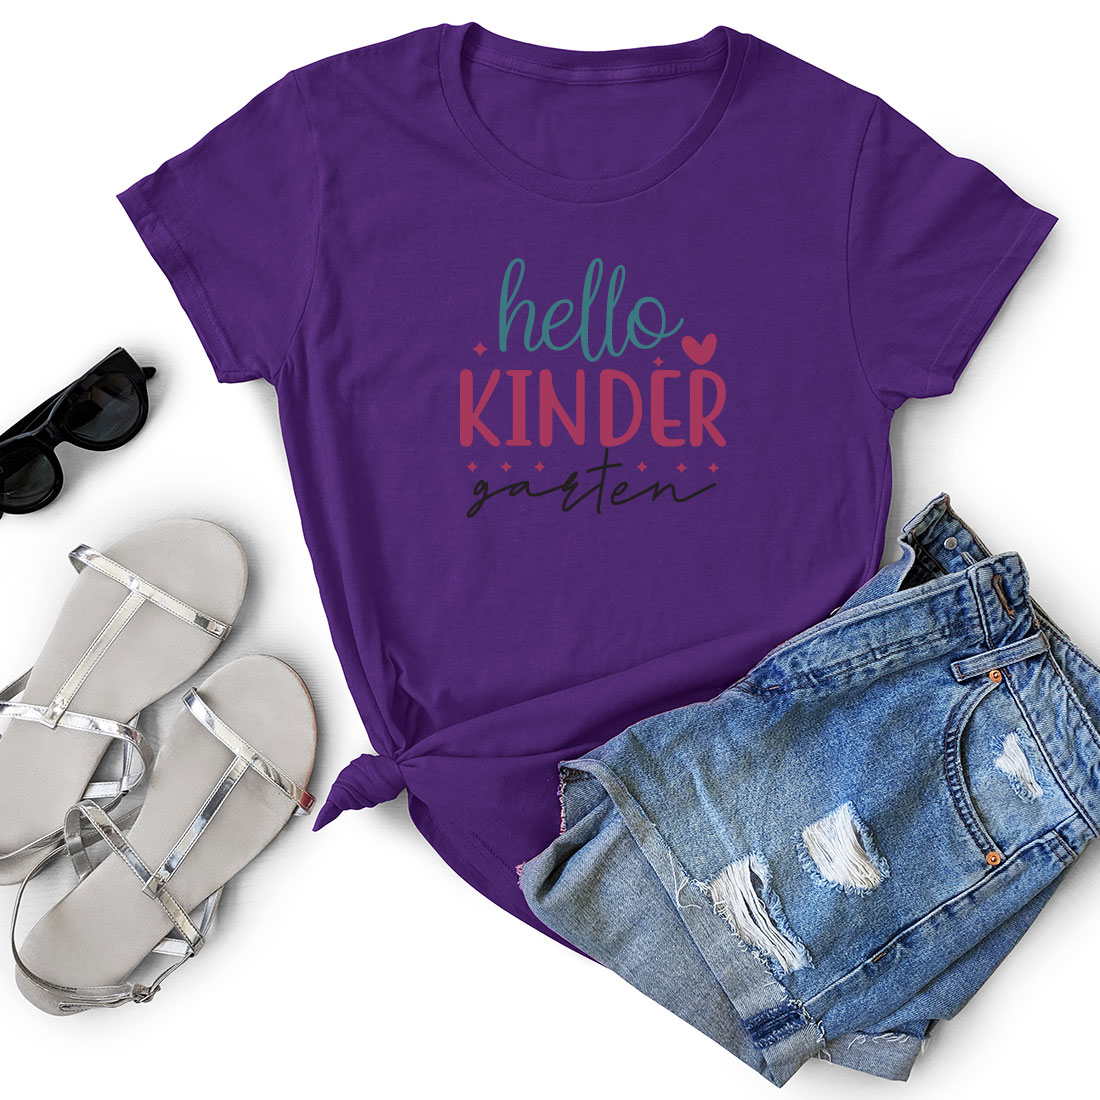 T - shirt with the words hello kinder written on it.